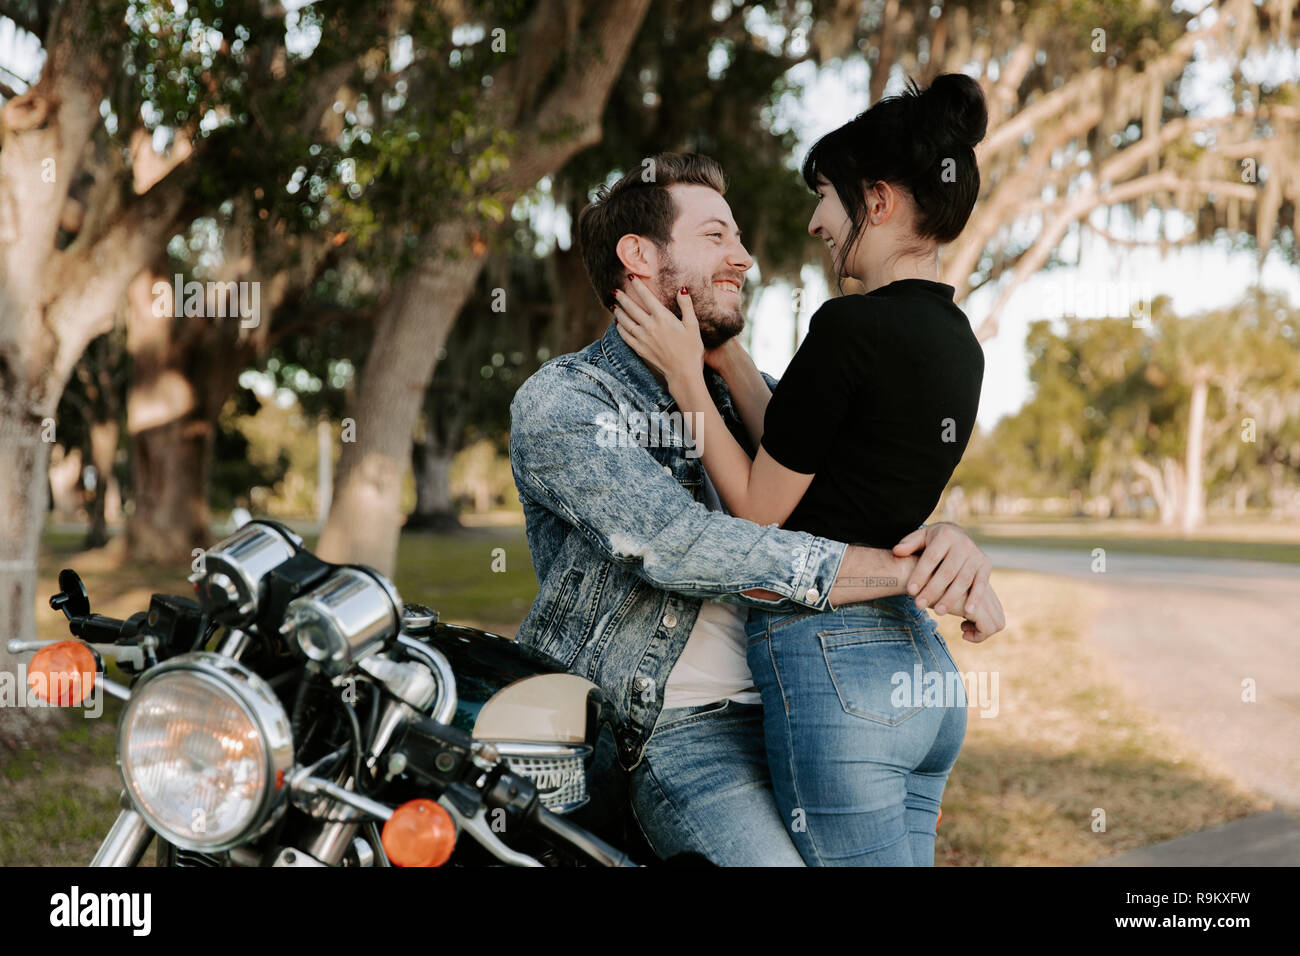 Edgy Motorcycle Couples Session | Reston, Virginia -  hannahbaldwinphotography.com